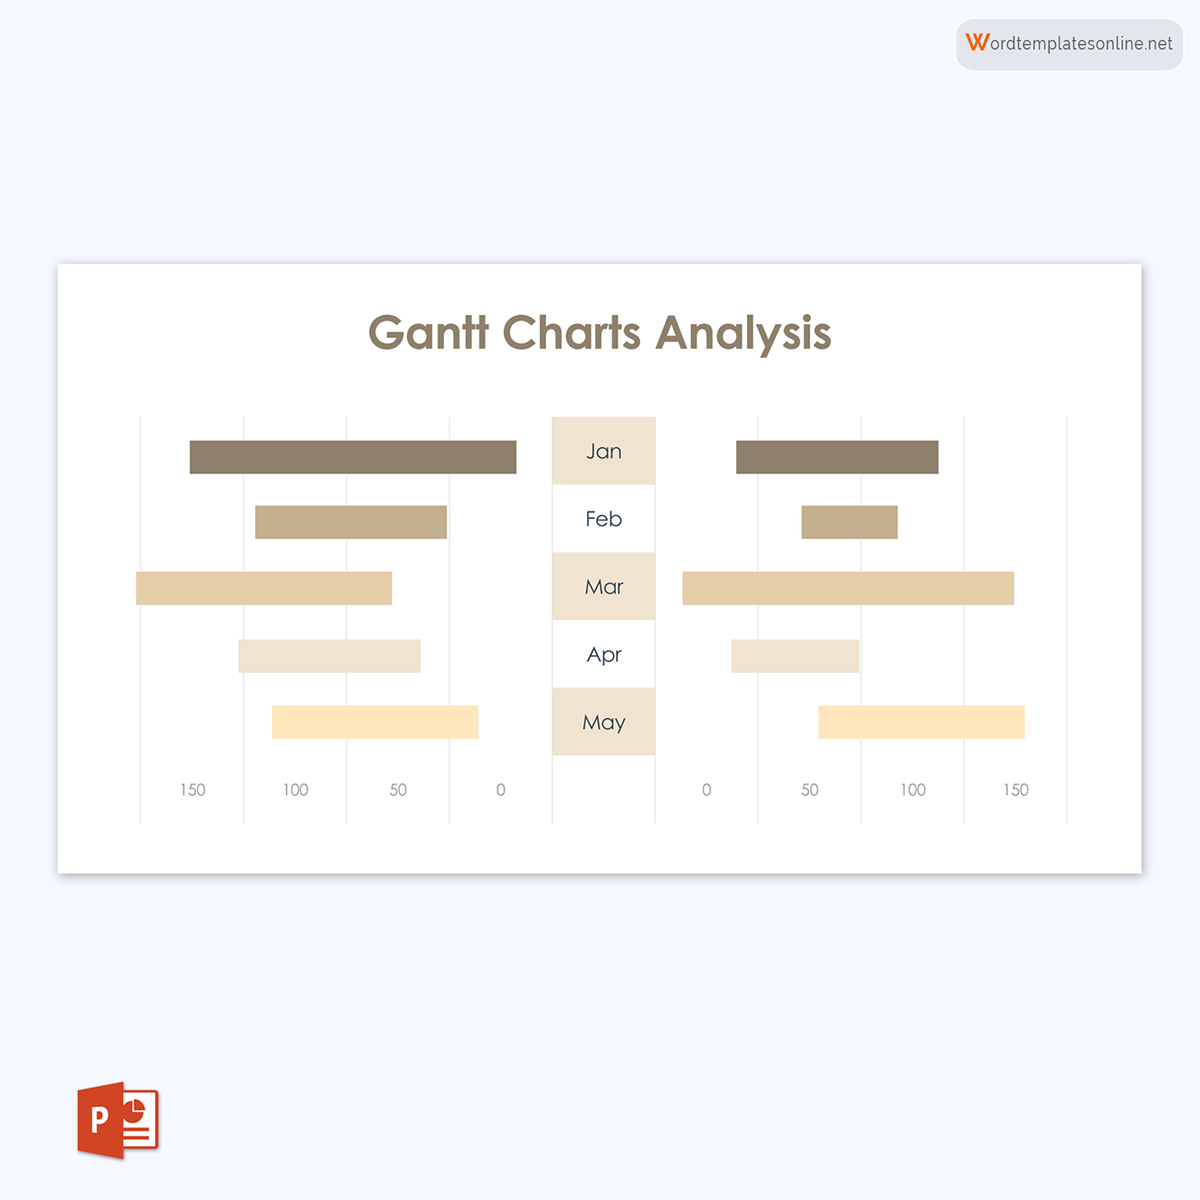 Great Fillable Half Yearly Gantt Chart Analysis Template 02 as PowerPoint Slides